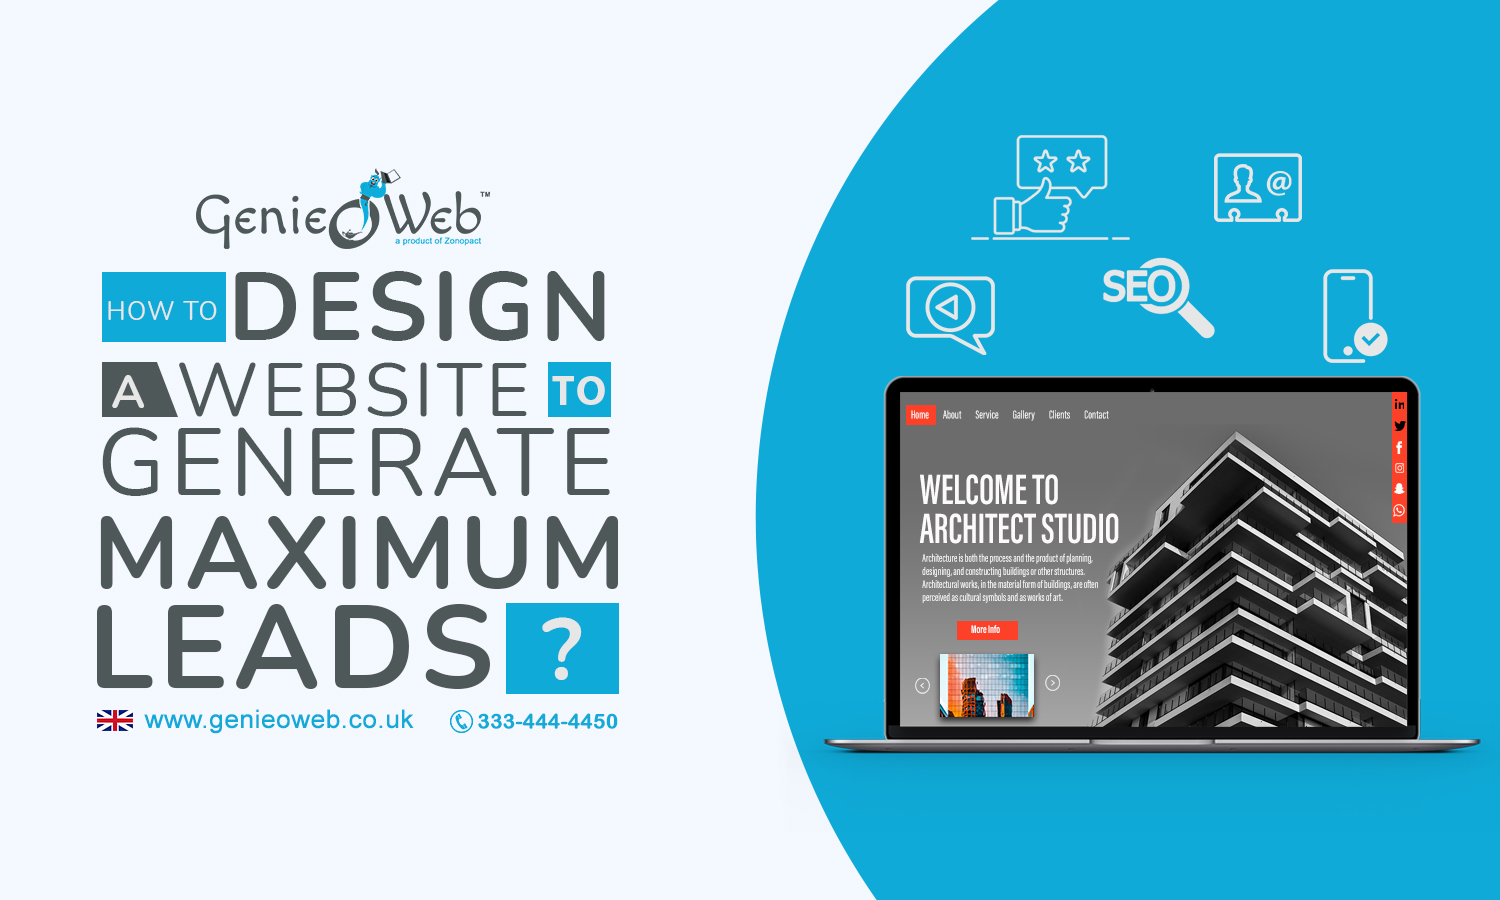 How to Design a Website to Generate Maximum Leads